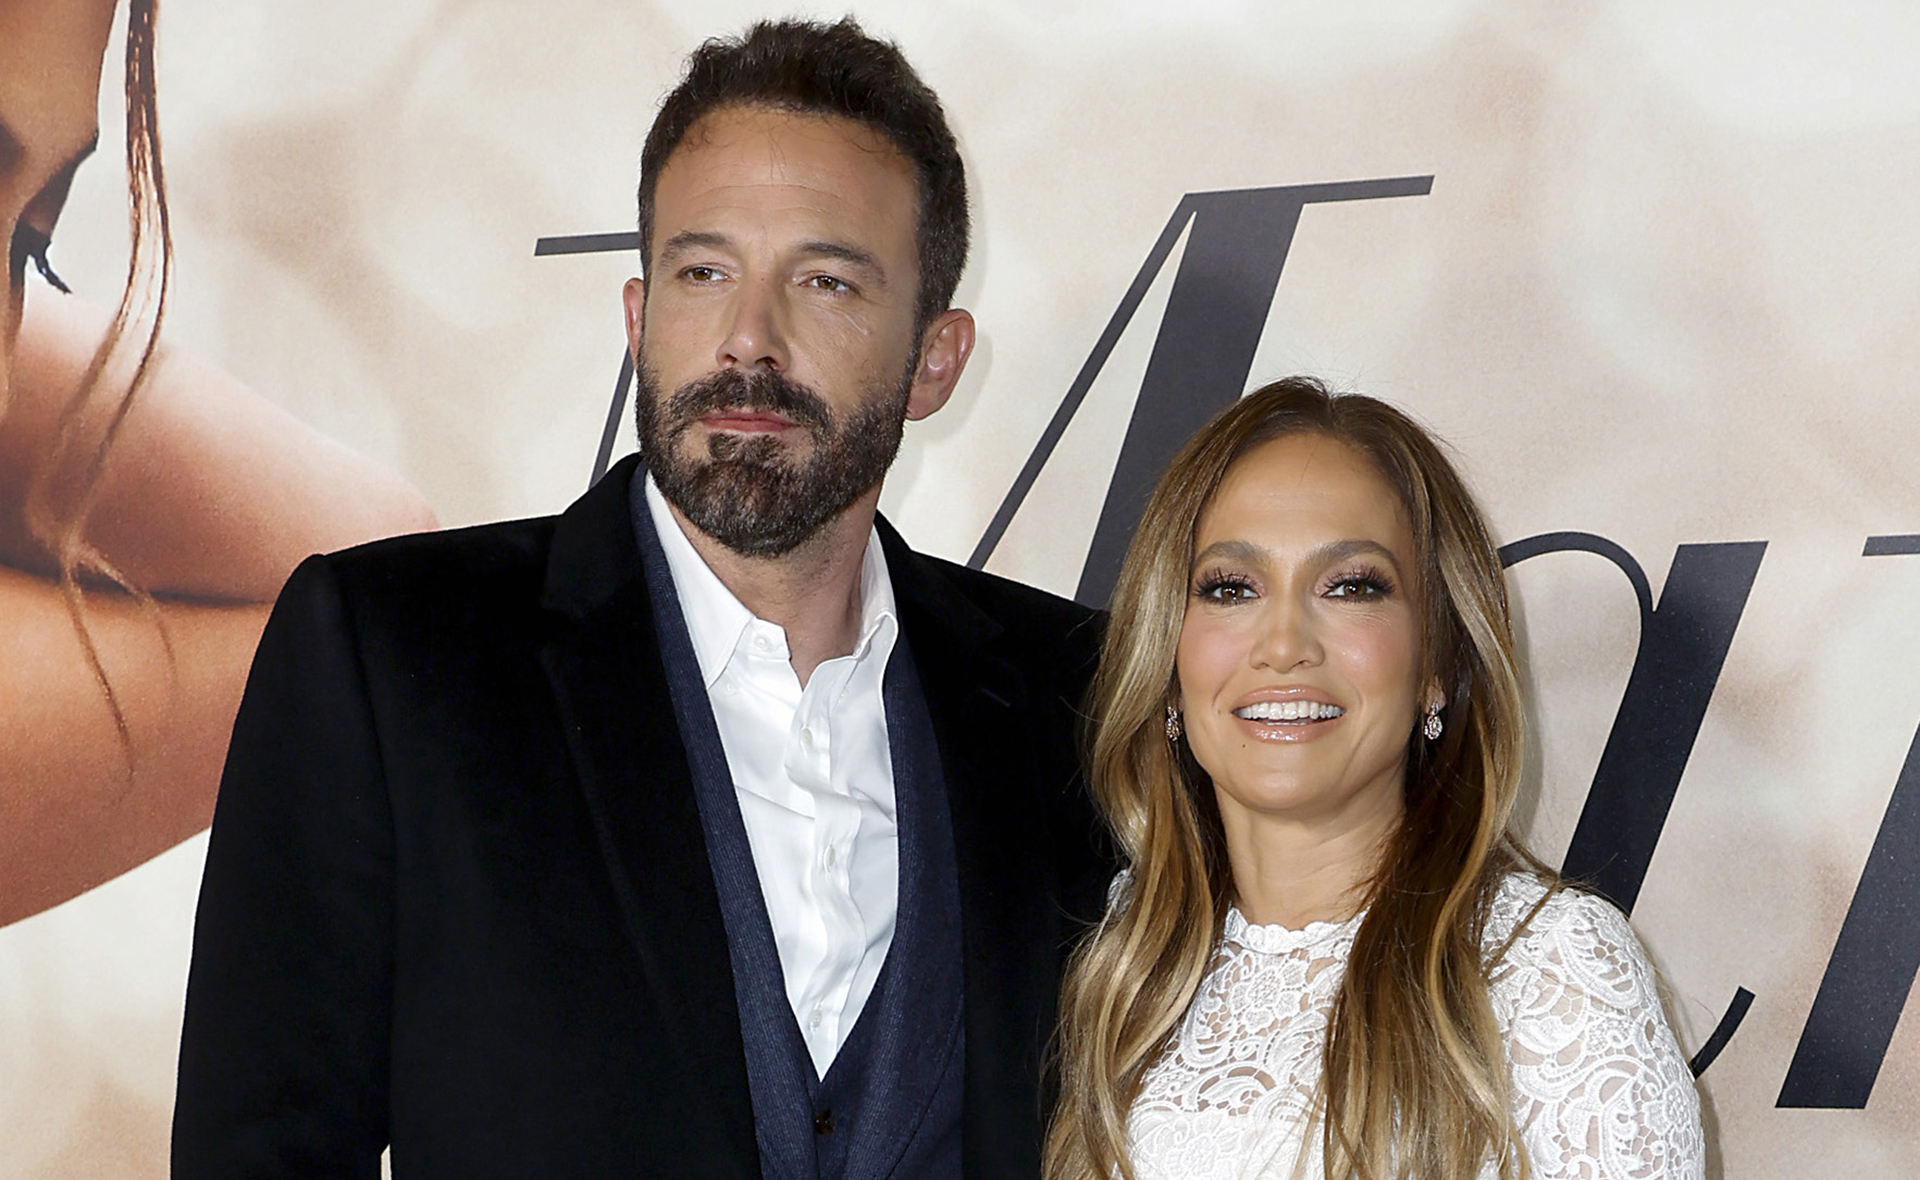 Jennifer Lopez and Ben Affleck tie the knot in an intimate Las Vegas wedding